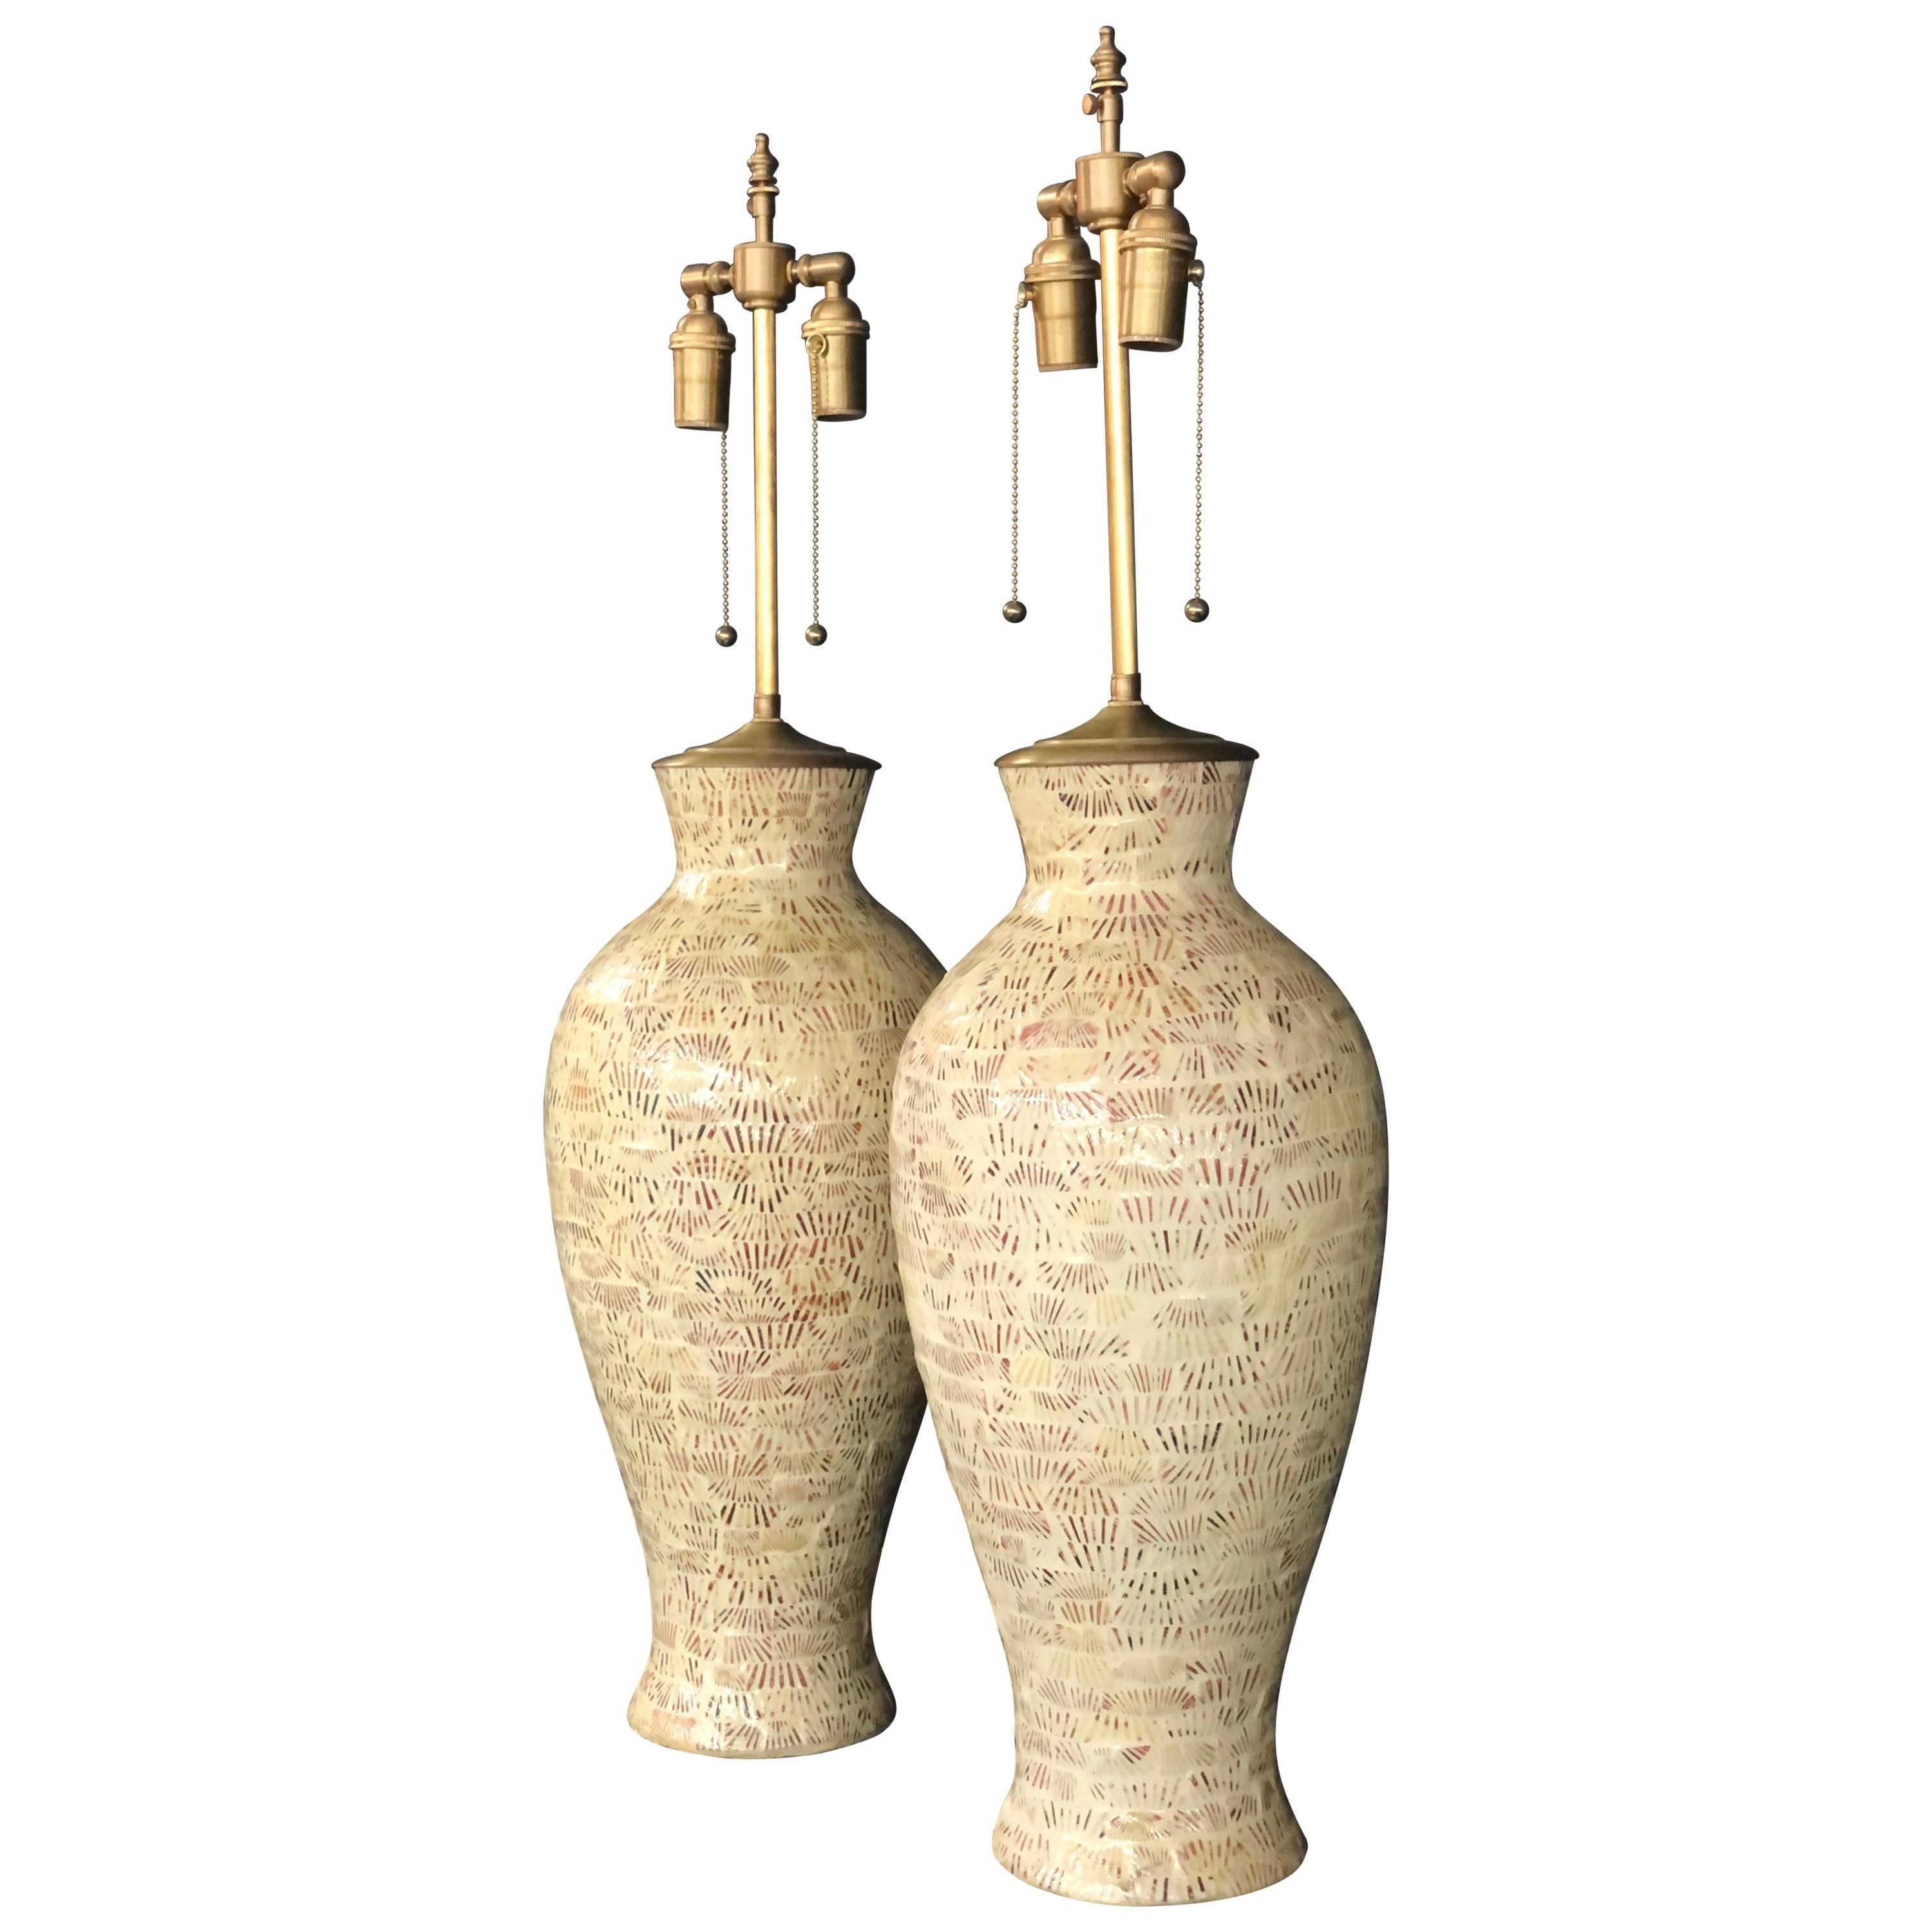 Large Pair of Ceramic Vessels with "Scallop" Inset Pattern and Lamp Application